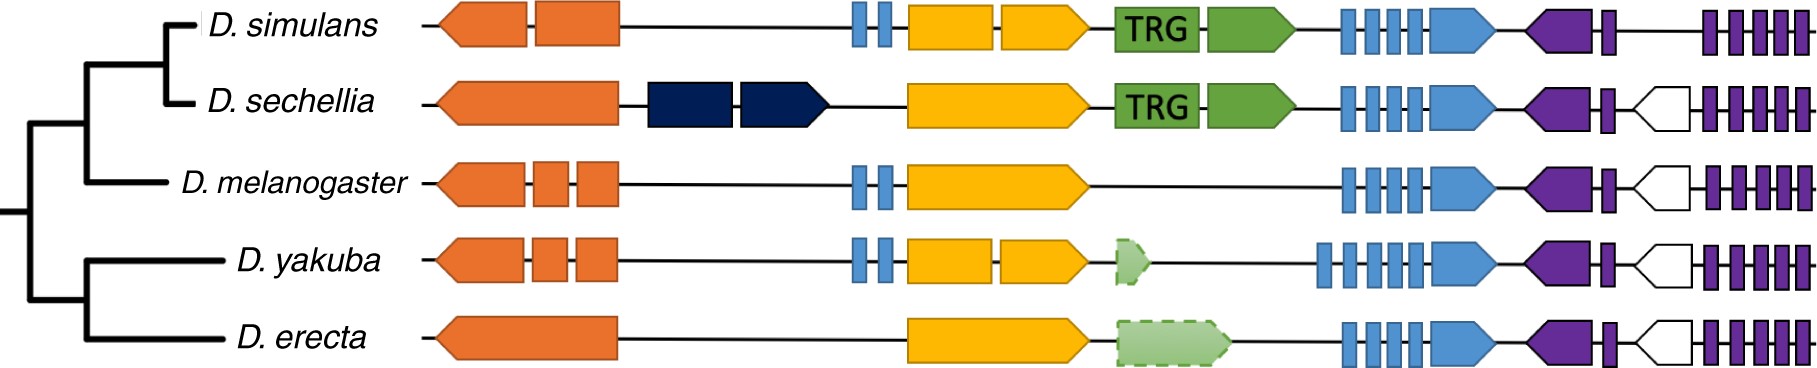 DNA regions homologous to the TRGF containing Dsim_GD19764 and Dsec_GM10790